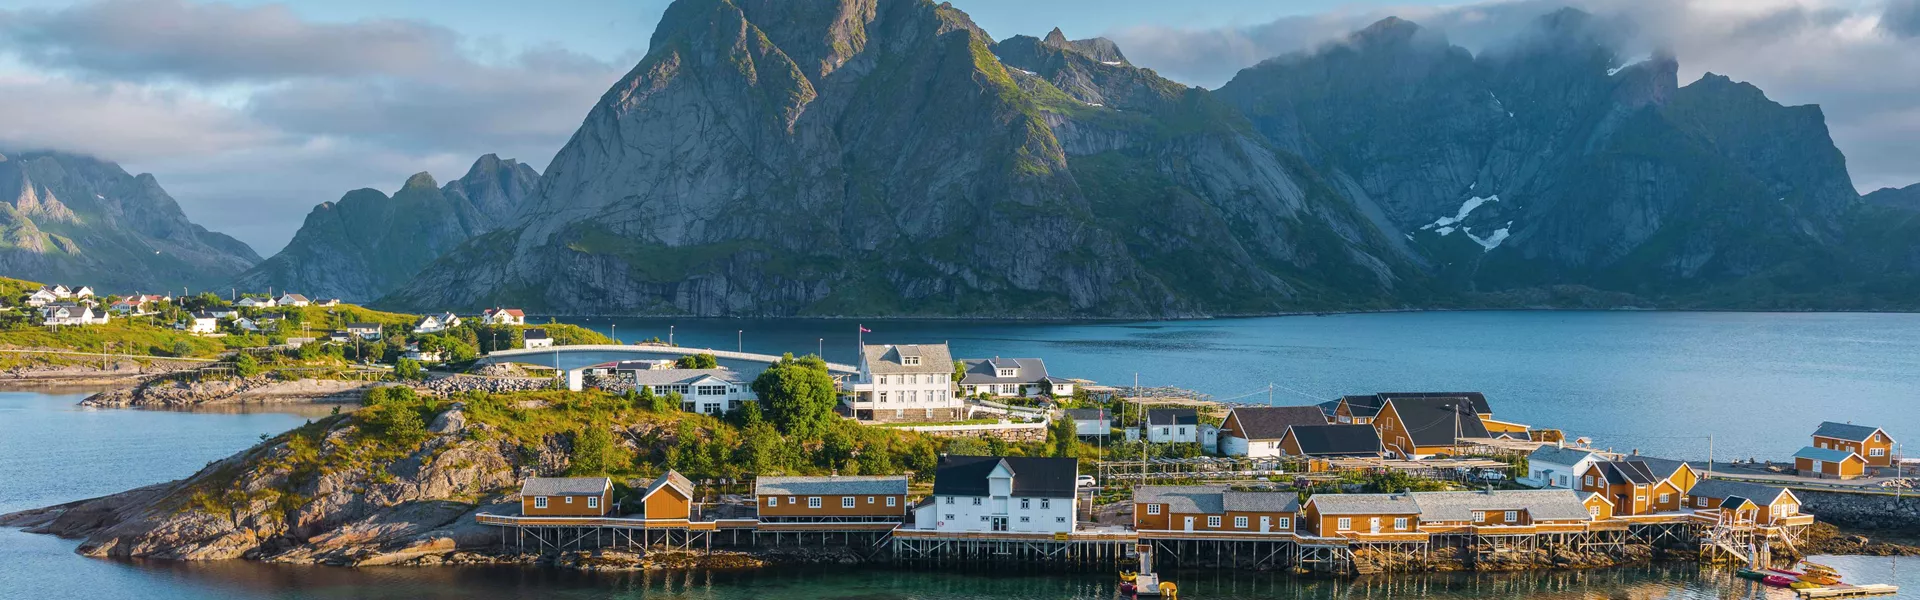 An aerial view of a small town on Lofoten Islands in Norway